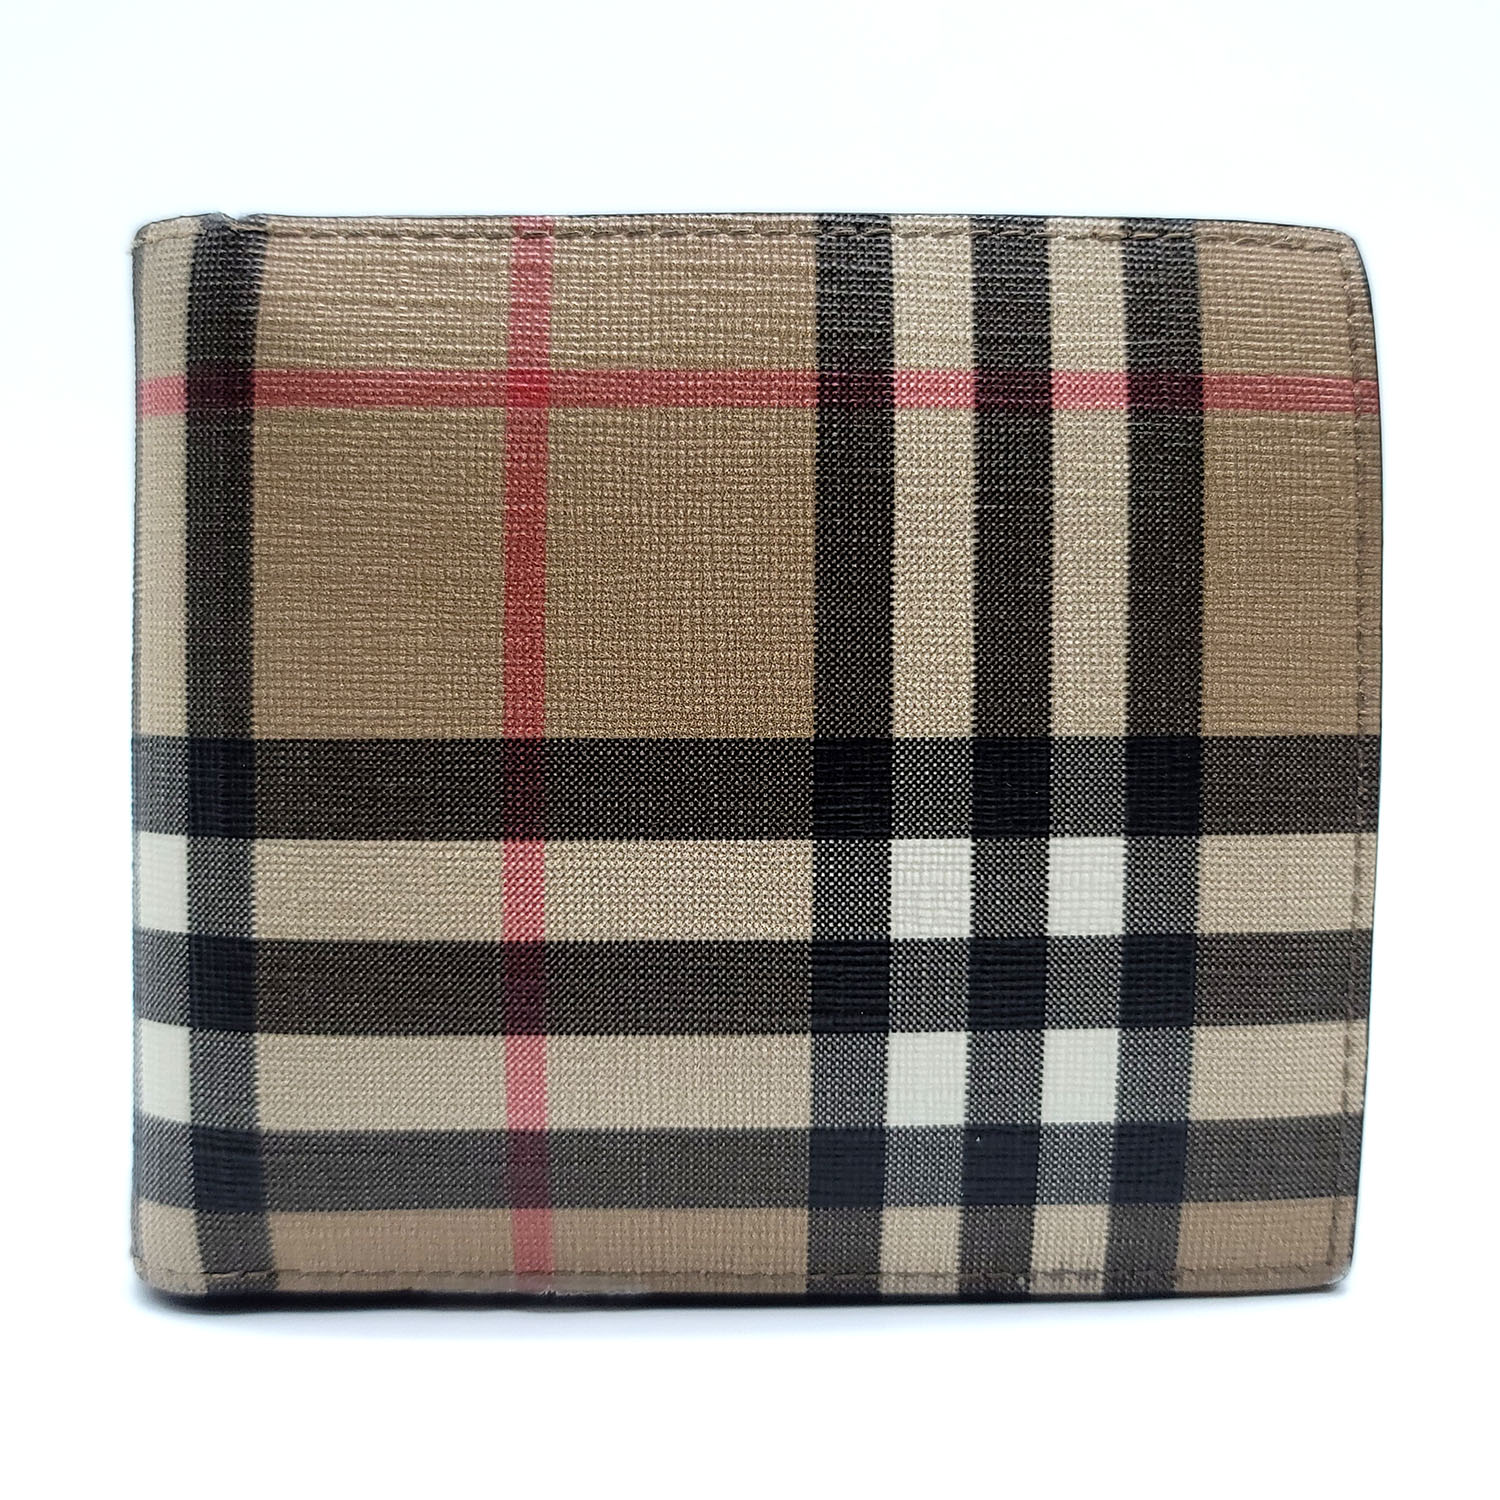 NWT BURBERRY BURBERRY LILA VINTAGE CHECK BIFOLD WALLET